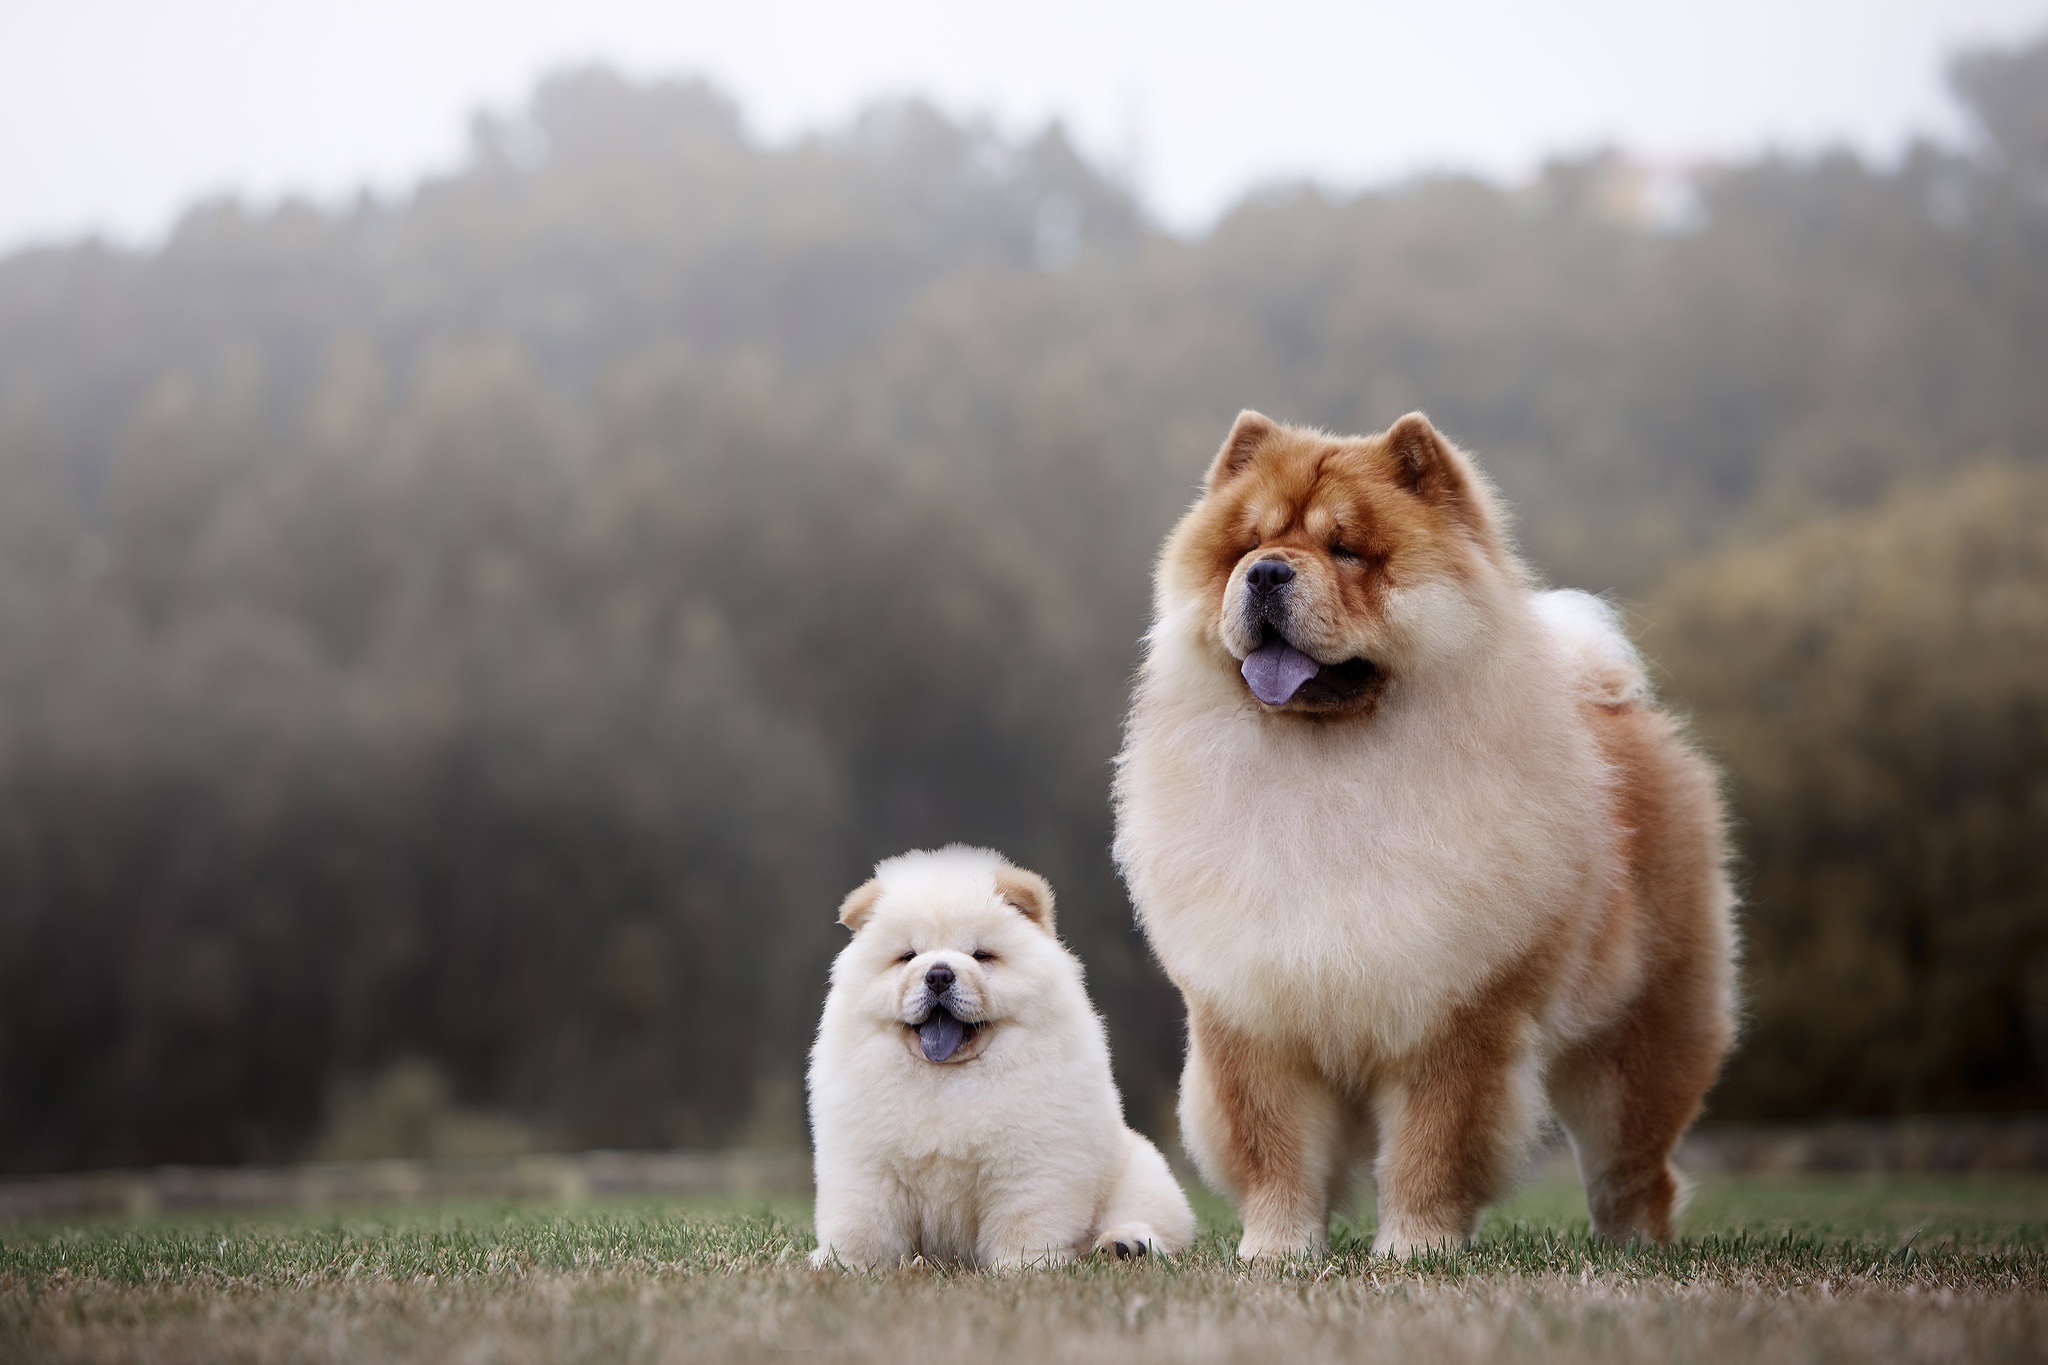 Chow Chow wallpapers, Visual delight, Captivating images, Lovely dogs, 2050x1370 HD Desktop